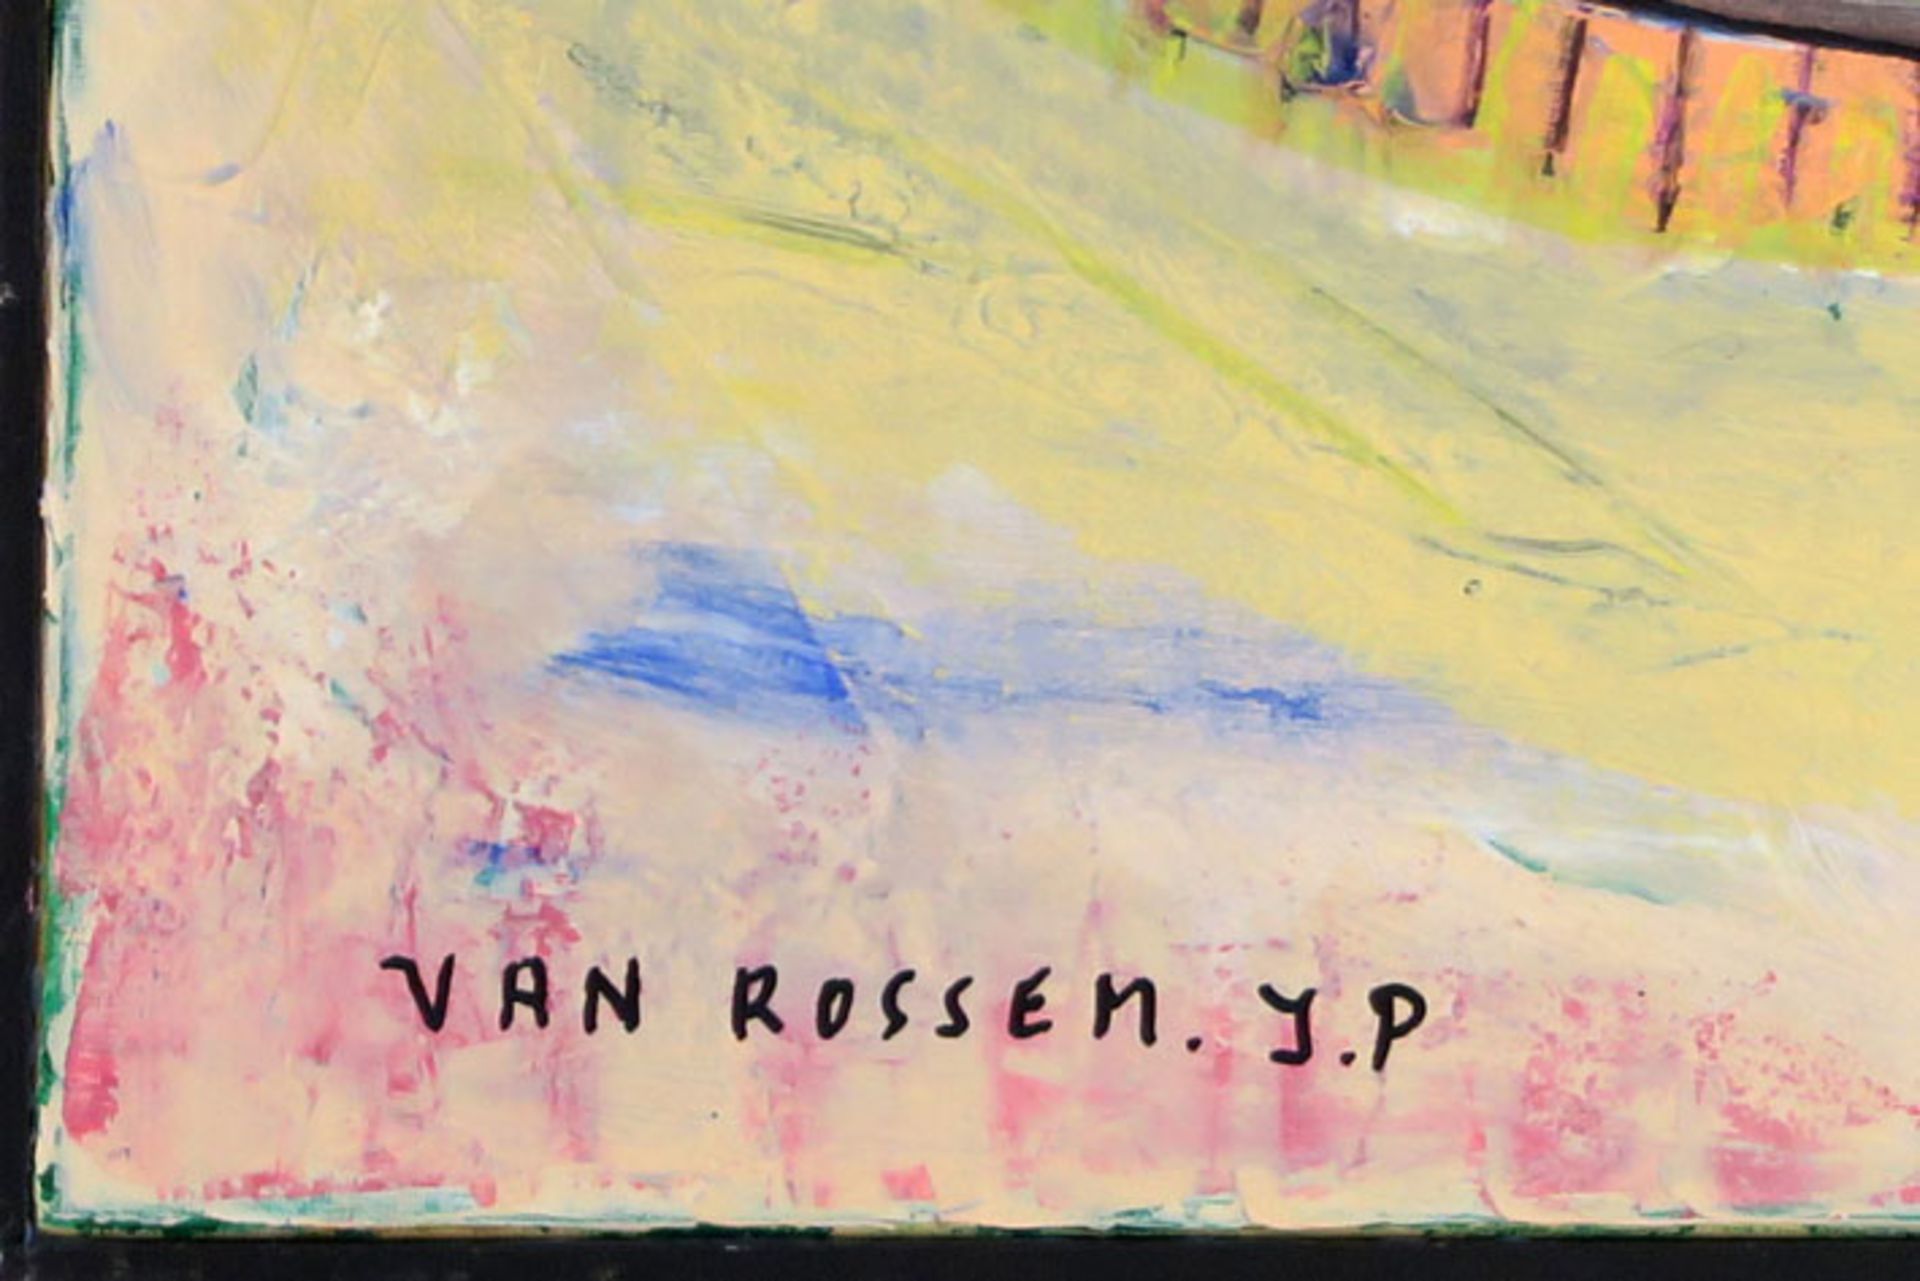 21st Cent. Belgian oil on canvas - signed Jean-Pierre Van Rossem and dated 2015 - [...] - Image 3 of 4